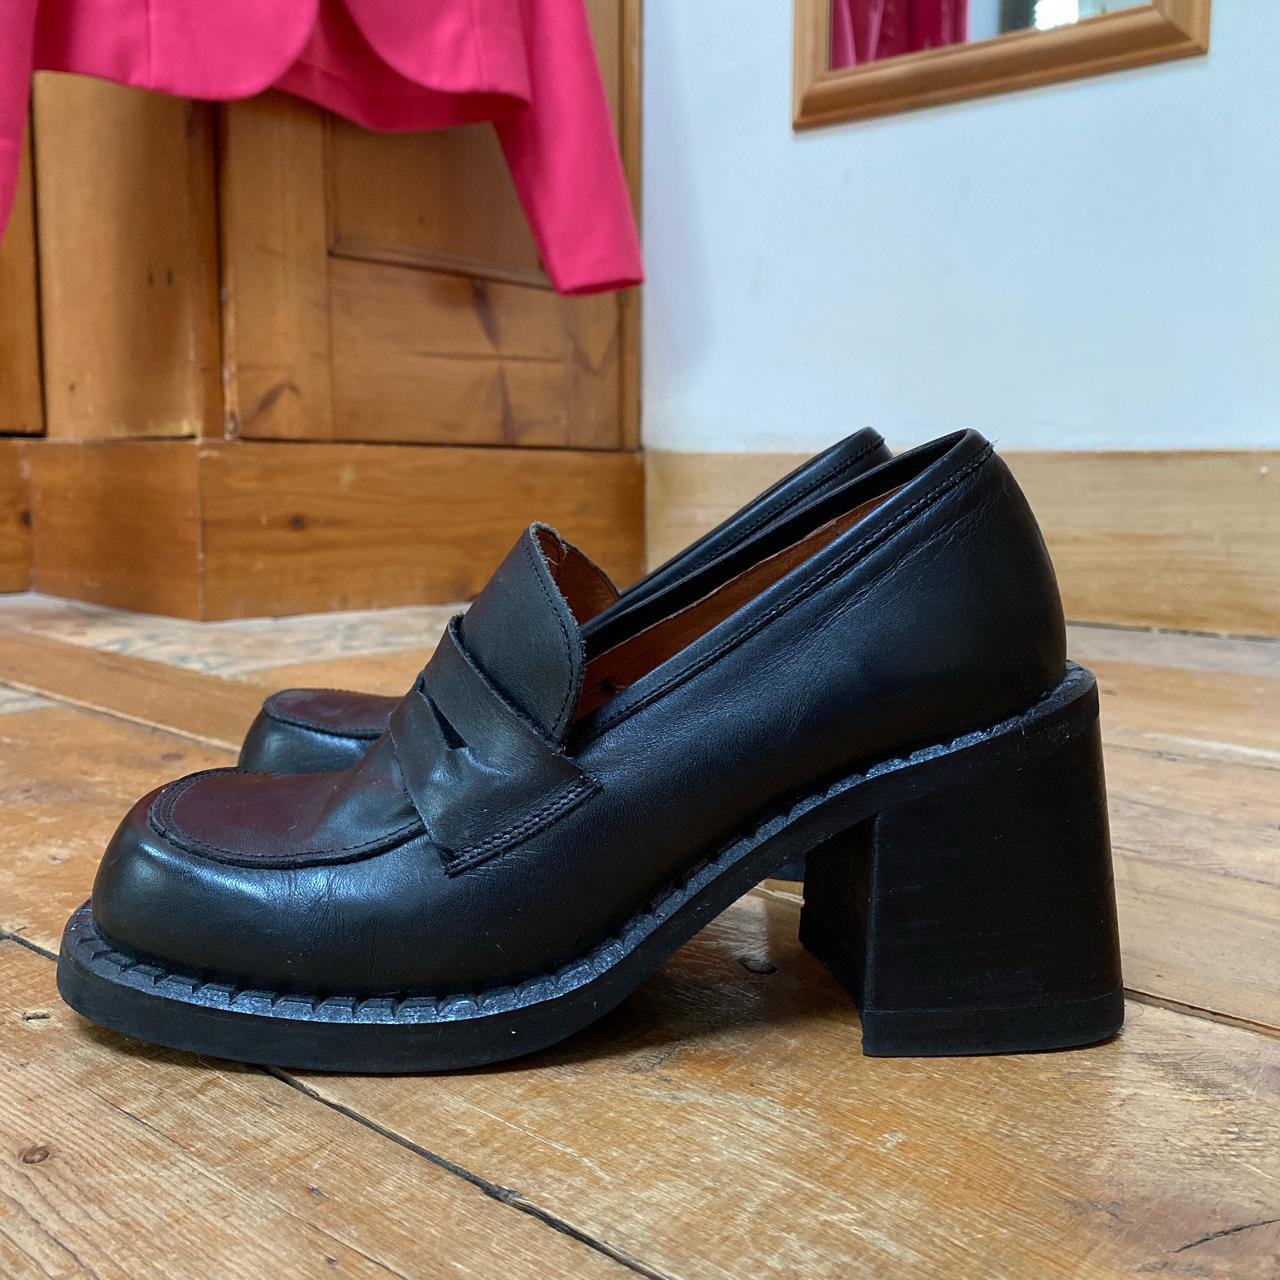 Rare black Molt’s loafers - made in Spain - with... - Depop